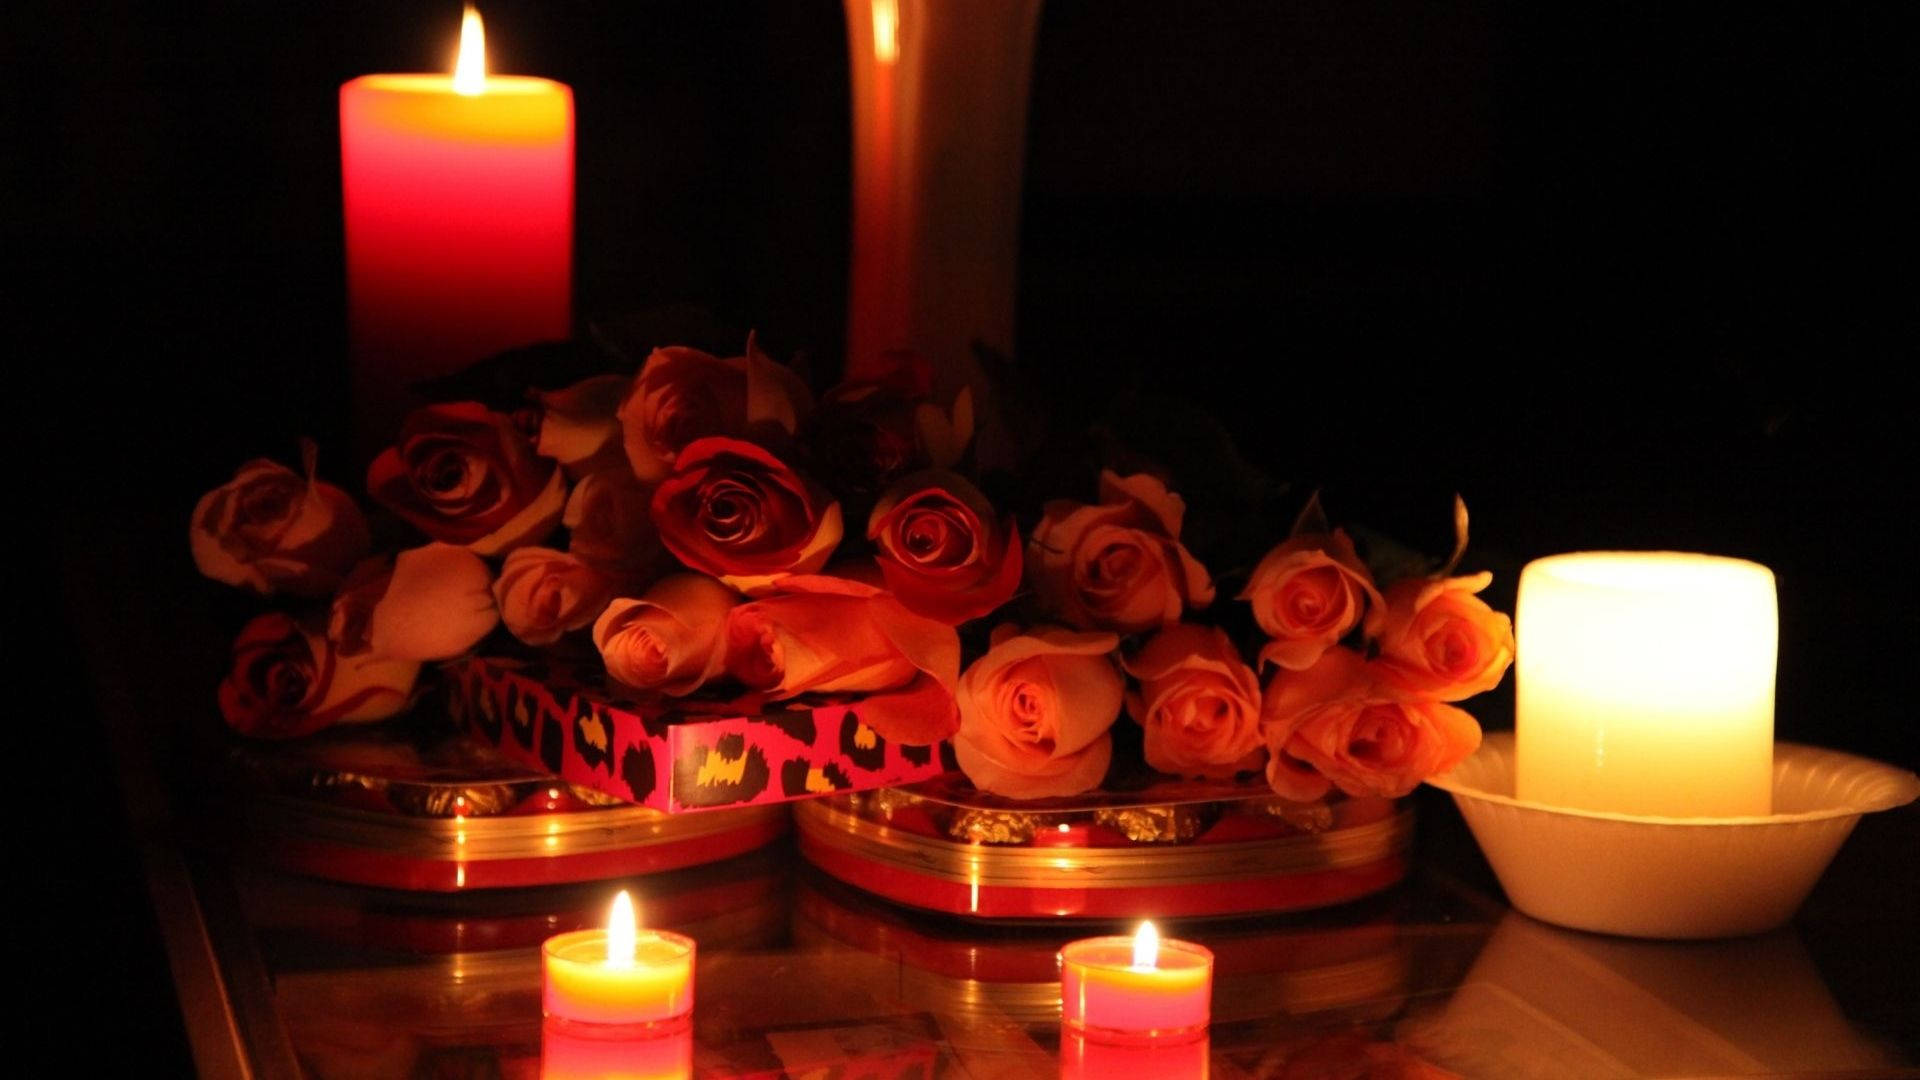 Candles And Roses On Table Wallpaper